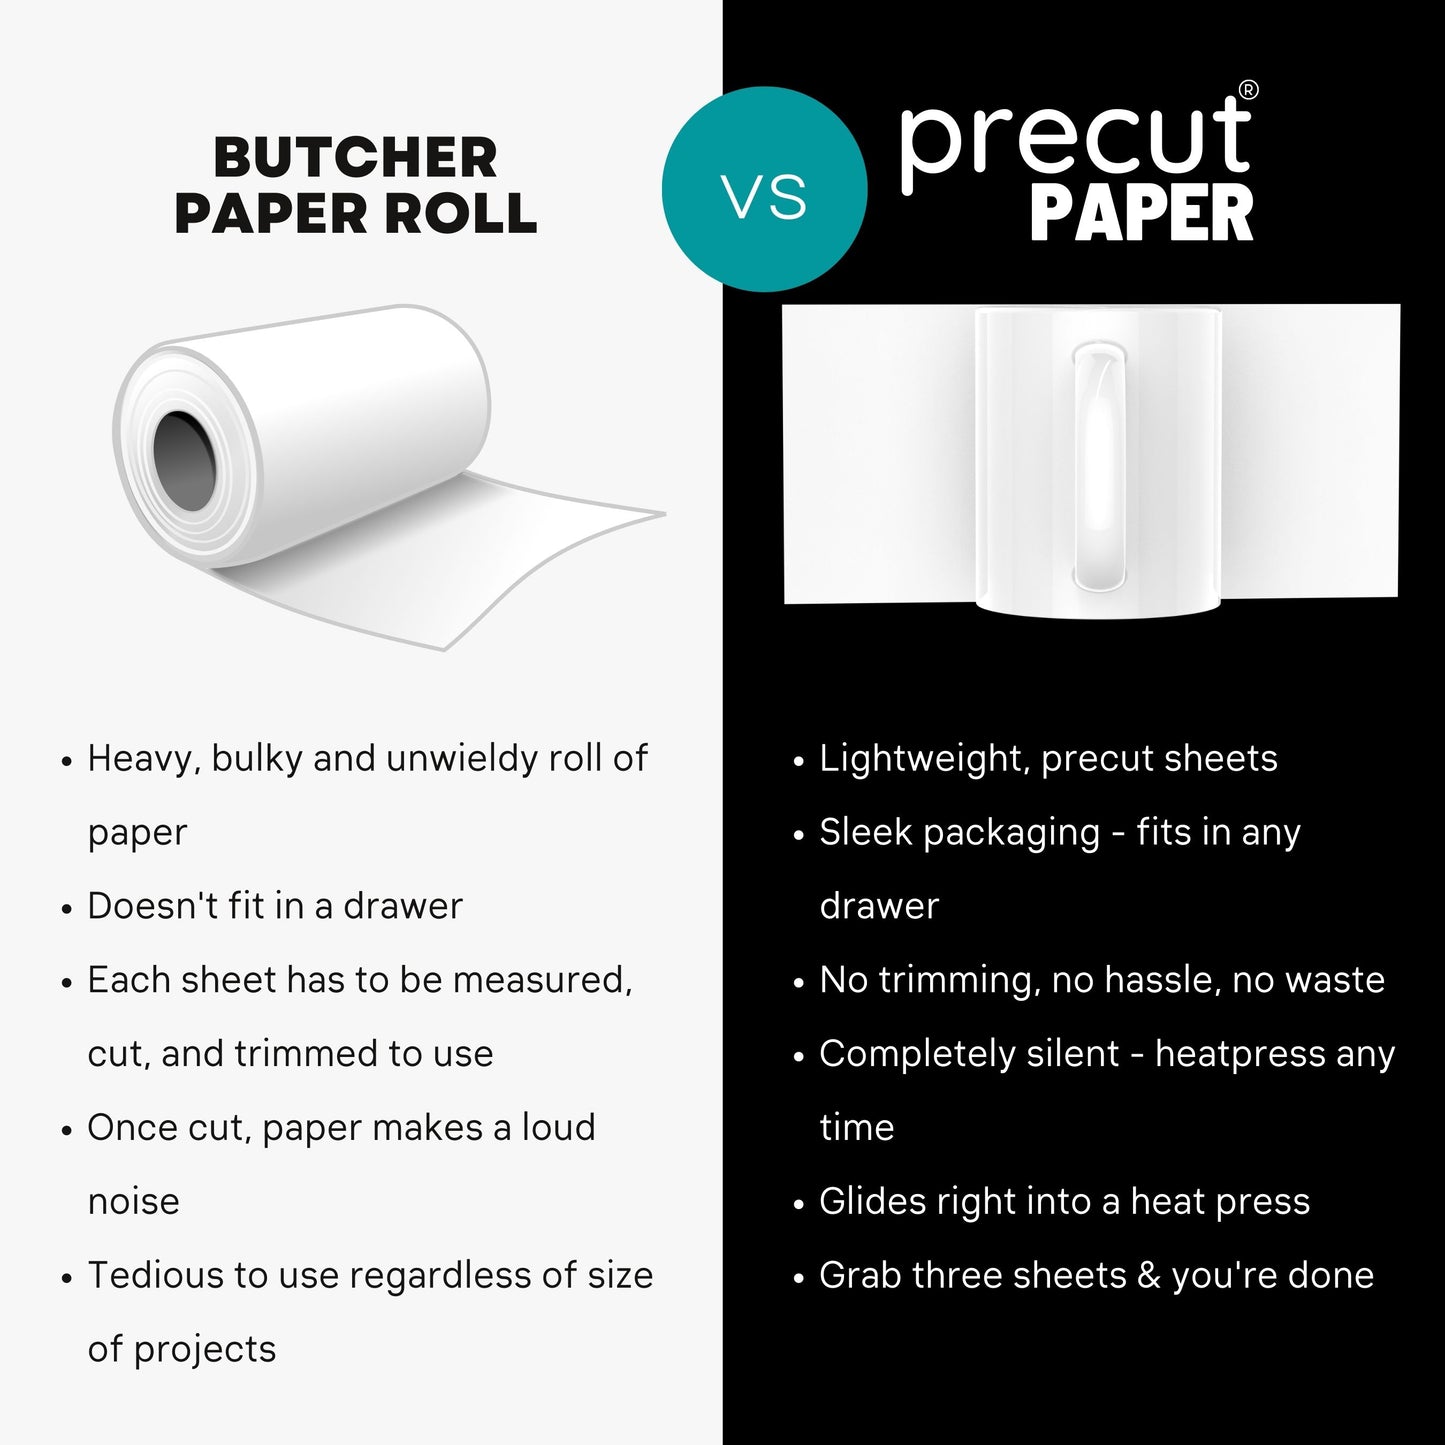 Precut Butcher Paper Sheets - Fits 15 oz Sublimation Mugs Perfectly (10 in x 4.5 in), White, Uncoated